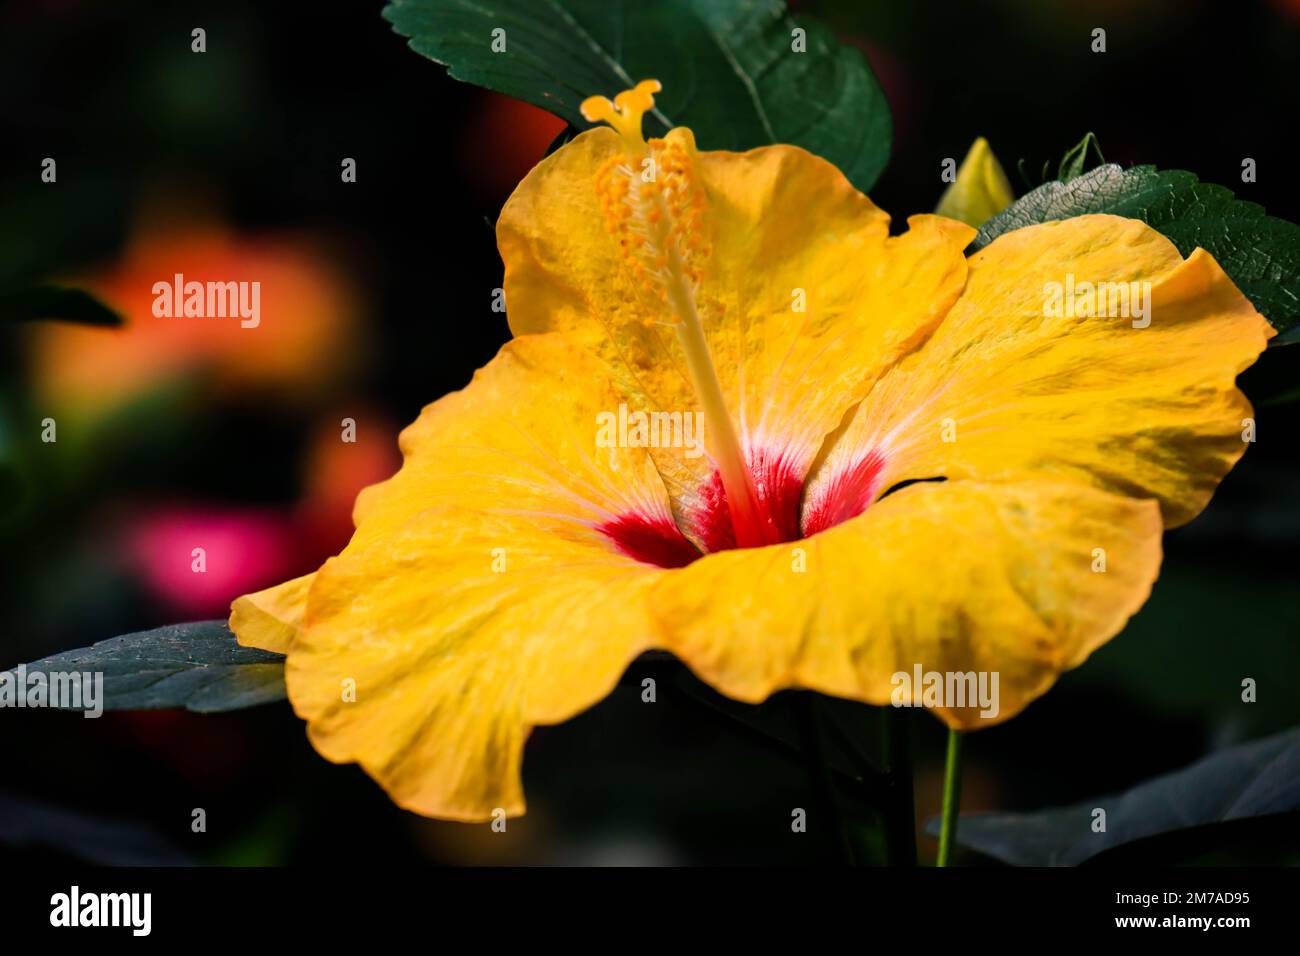 Hibiscus flower (Hibiscus rosa-sinensis L) is a shrub of the Malvaceae family originating from East Asia and widely grown as an ornamental plant in tr Stock Photo